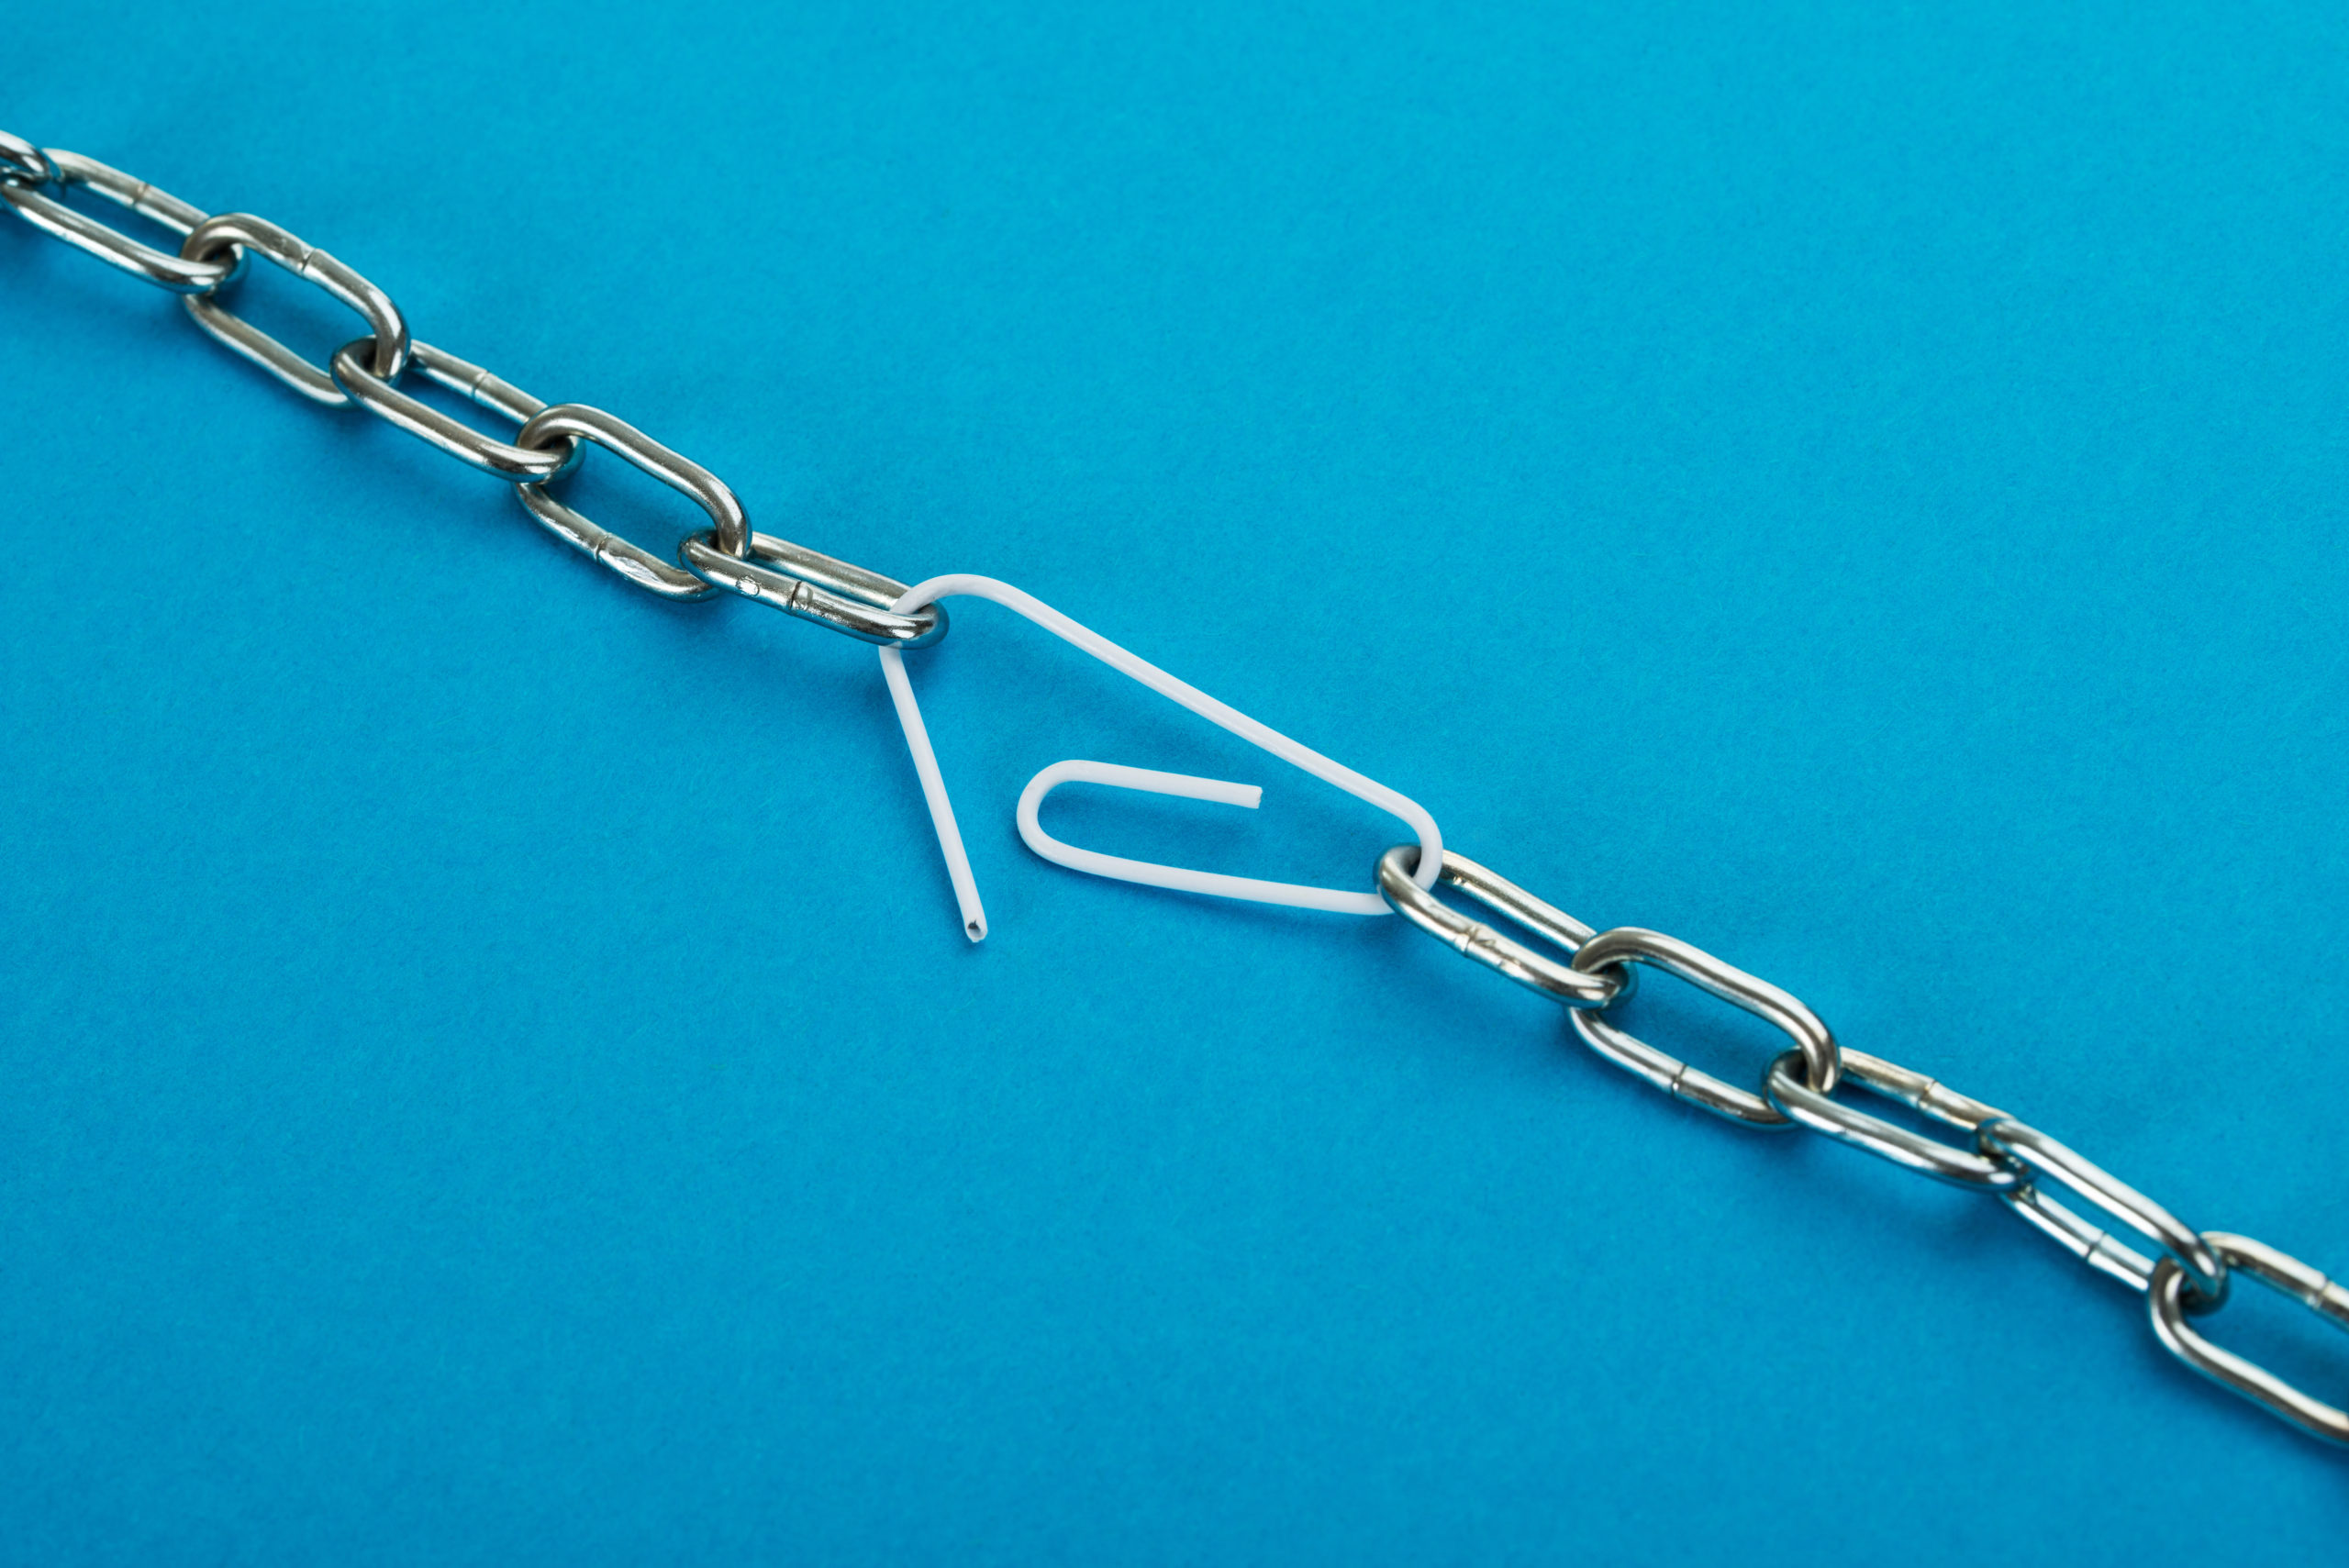 Chain Connected With Paper Clip